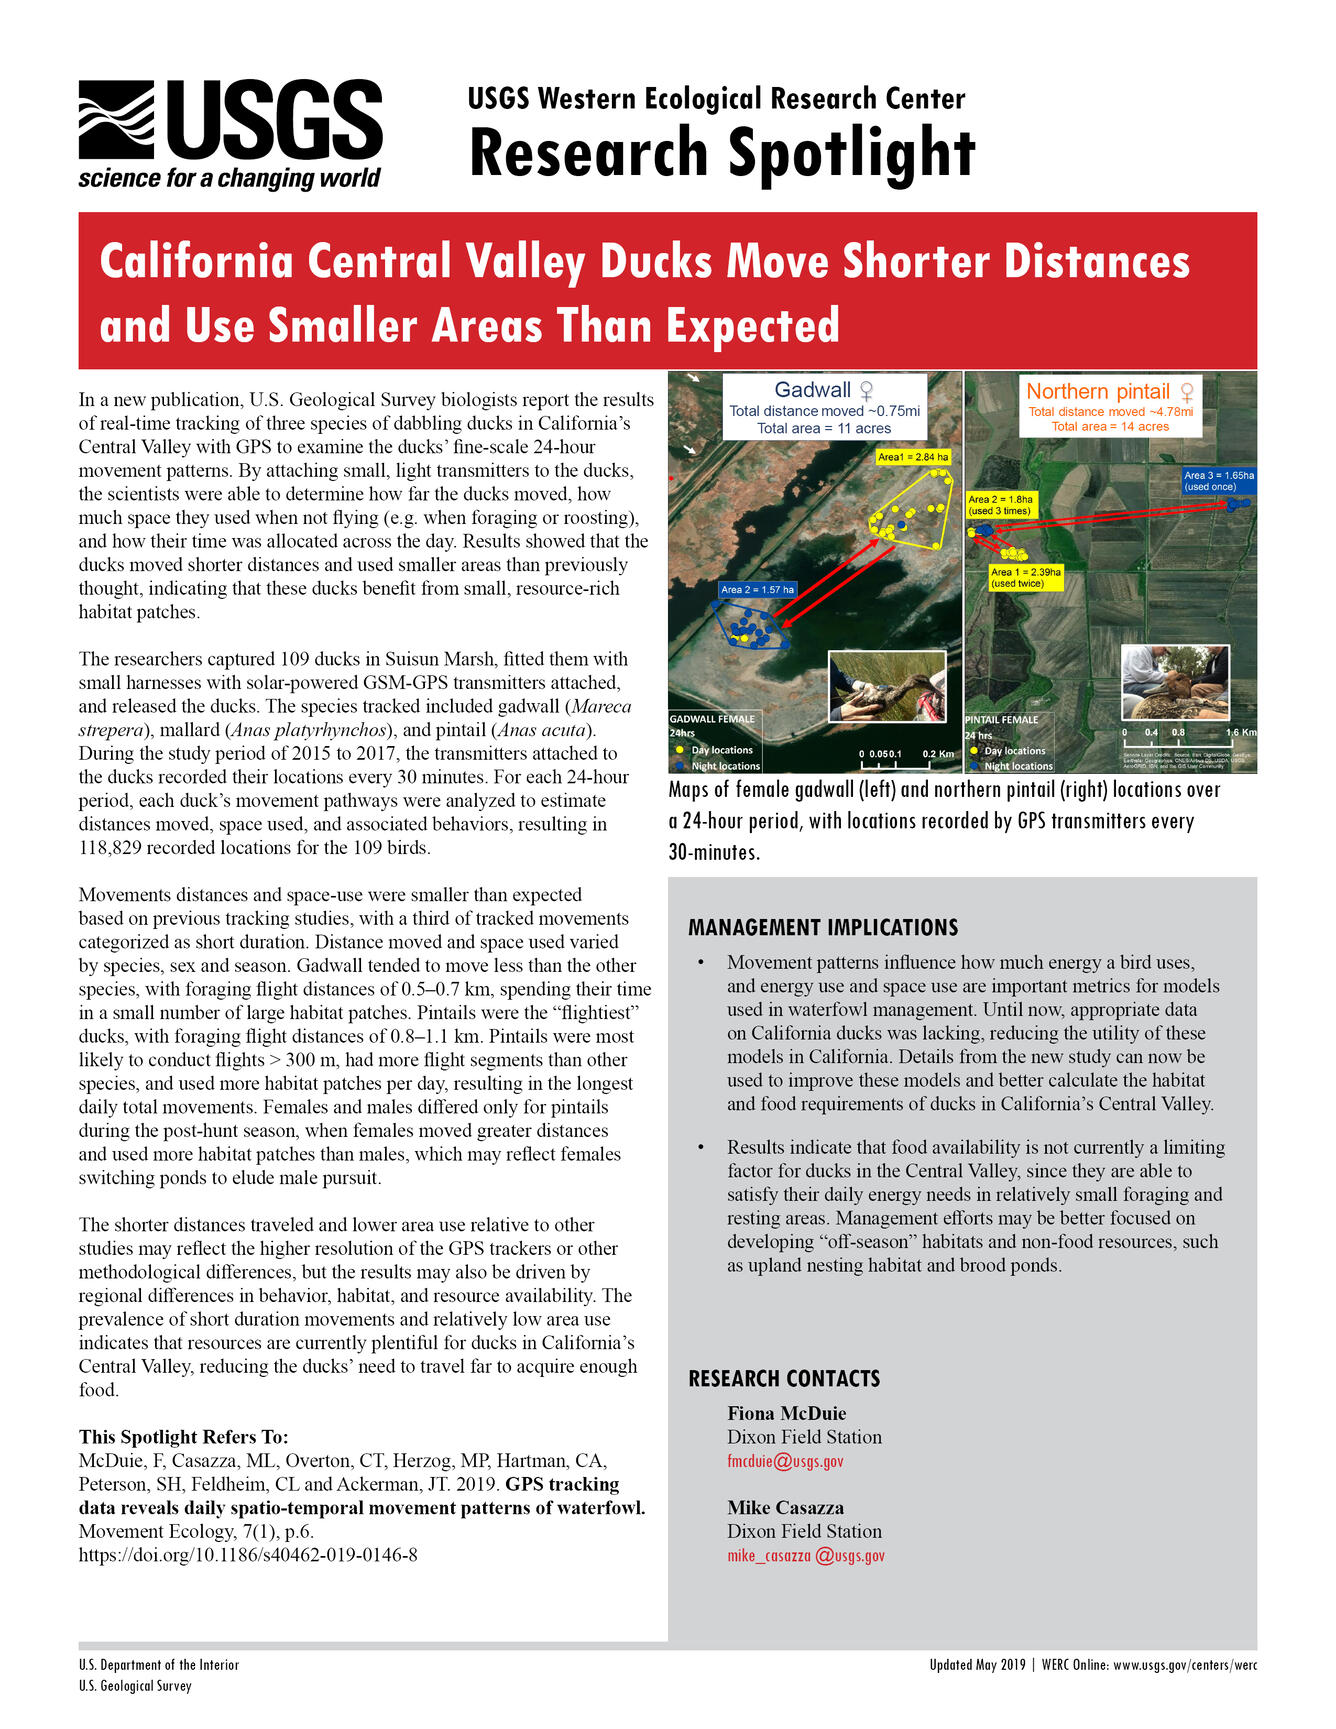 Research spotlight (text and images) about duck movement (pdf available)